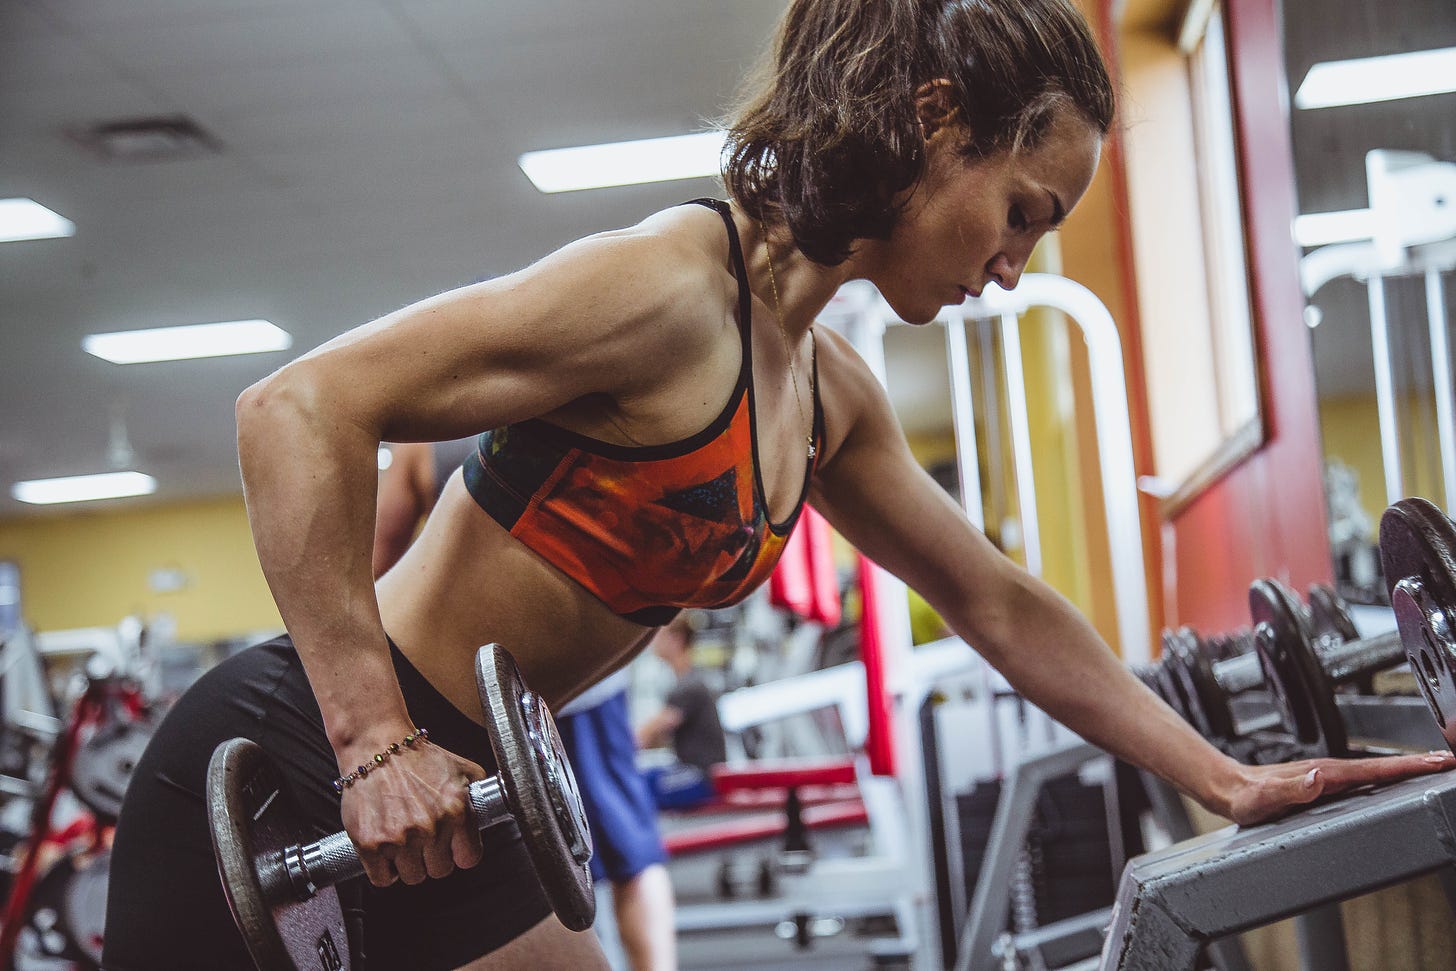 Woman lifting weights at the gym via unsplash